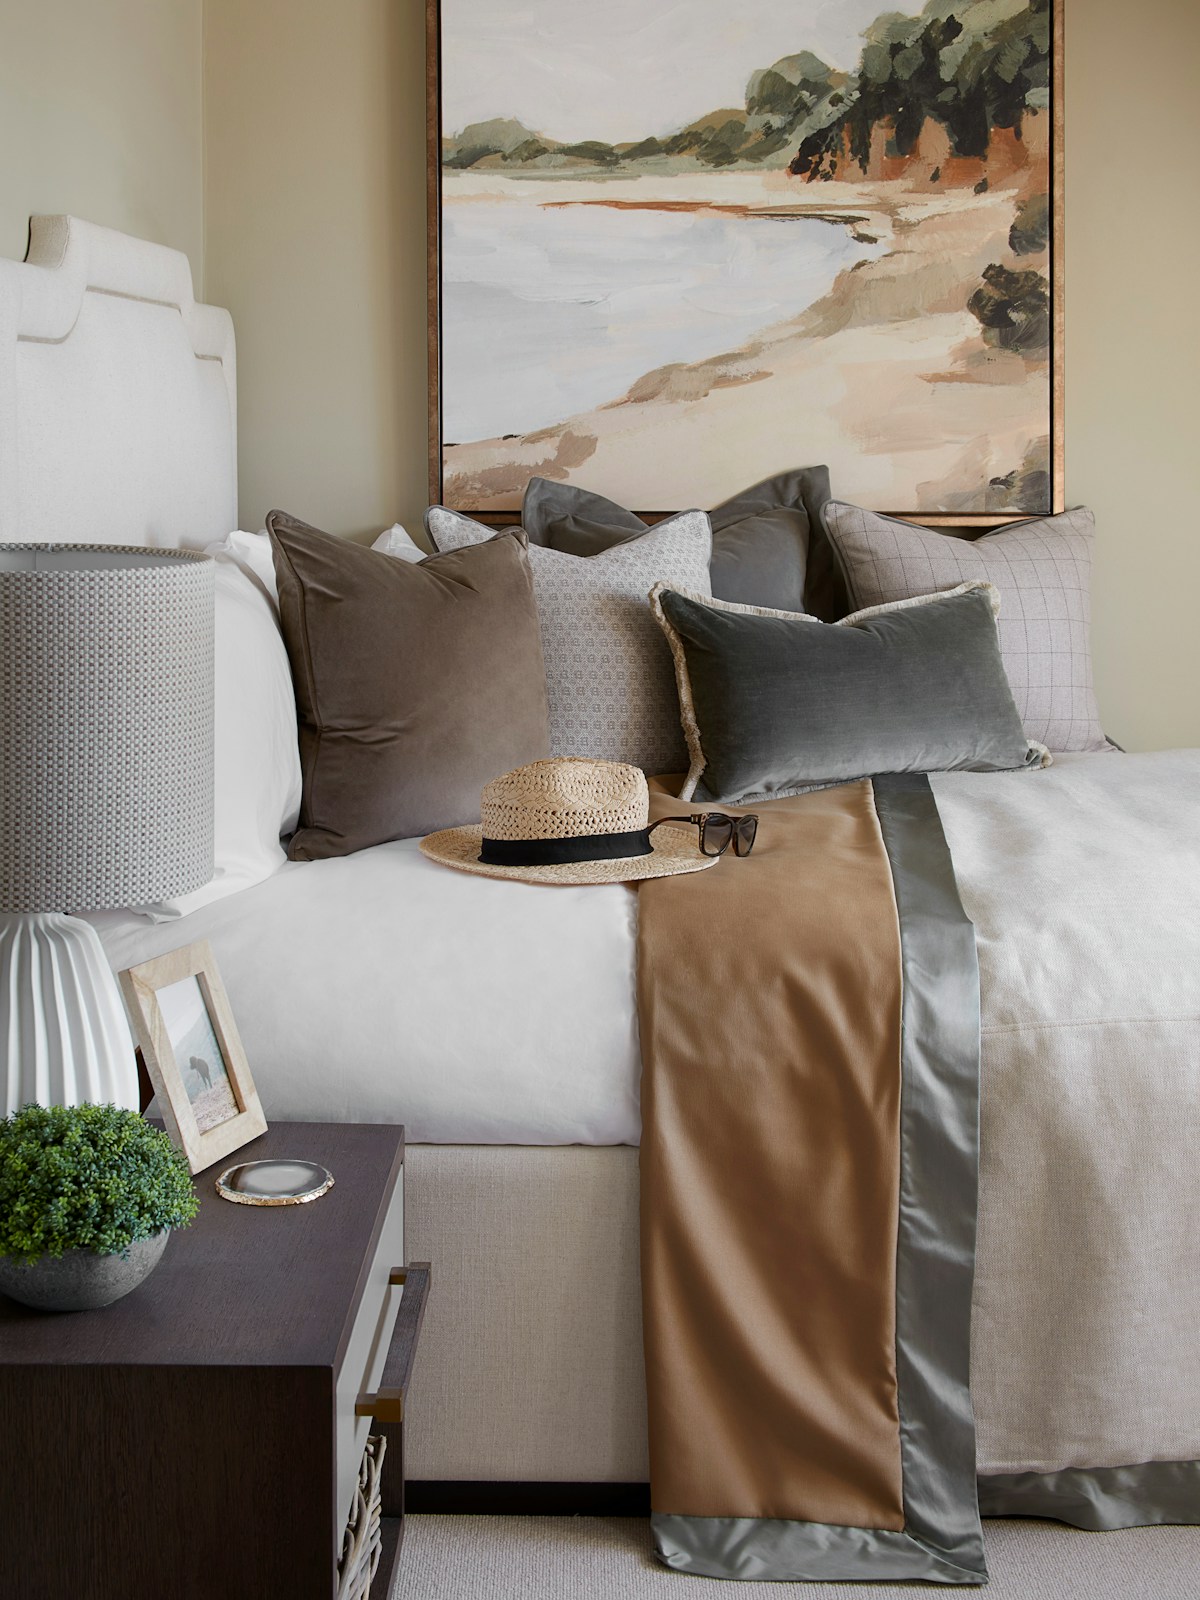 Inviting bedroom with Devereaux bed, "Bluff Bay" painting and various neutral cushions by LuxDeco, a small cream Teardrop porcelain table lamp by Jonathan Adler and 